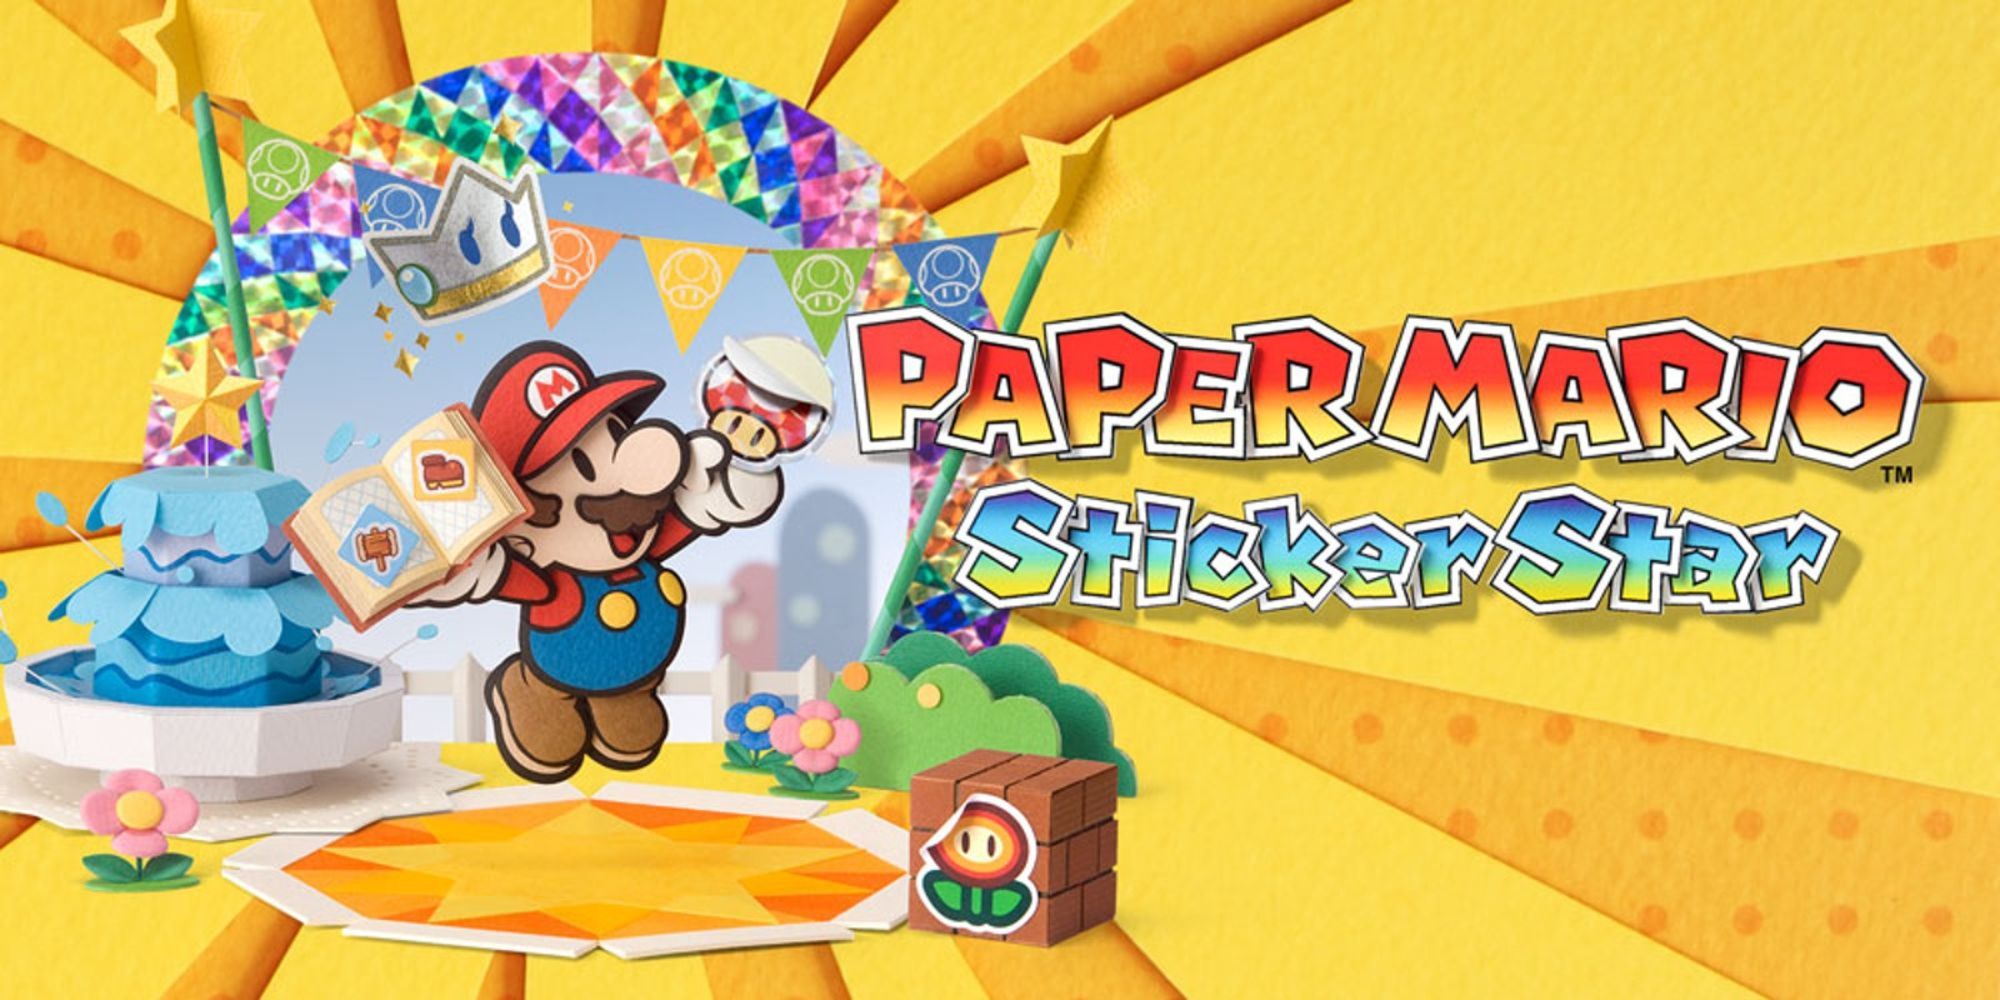 Mario stands in the center of the rainbow holding a Toad sticker and book in Paper Mario Sticker Star promotional art